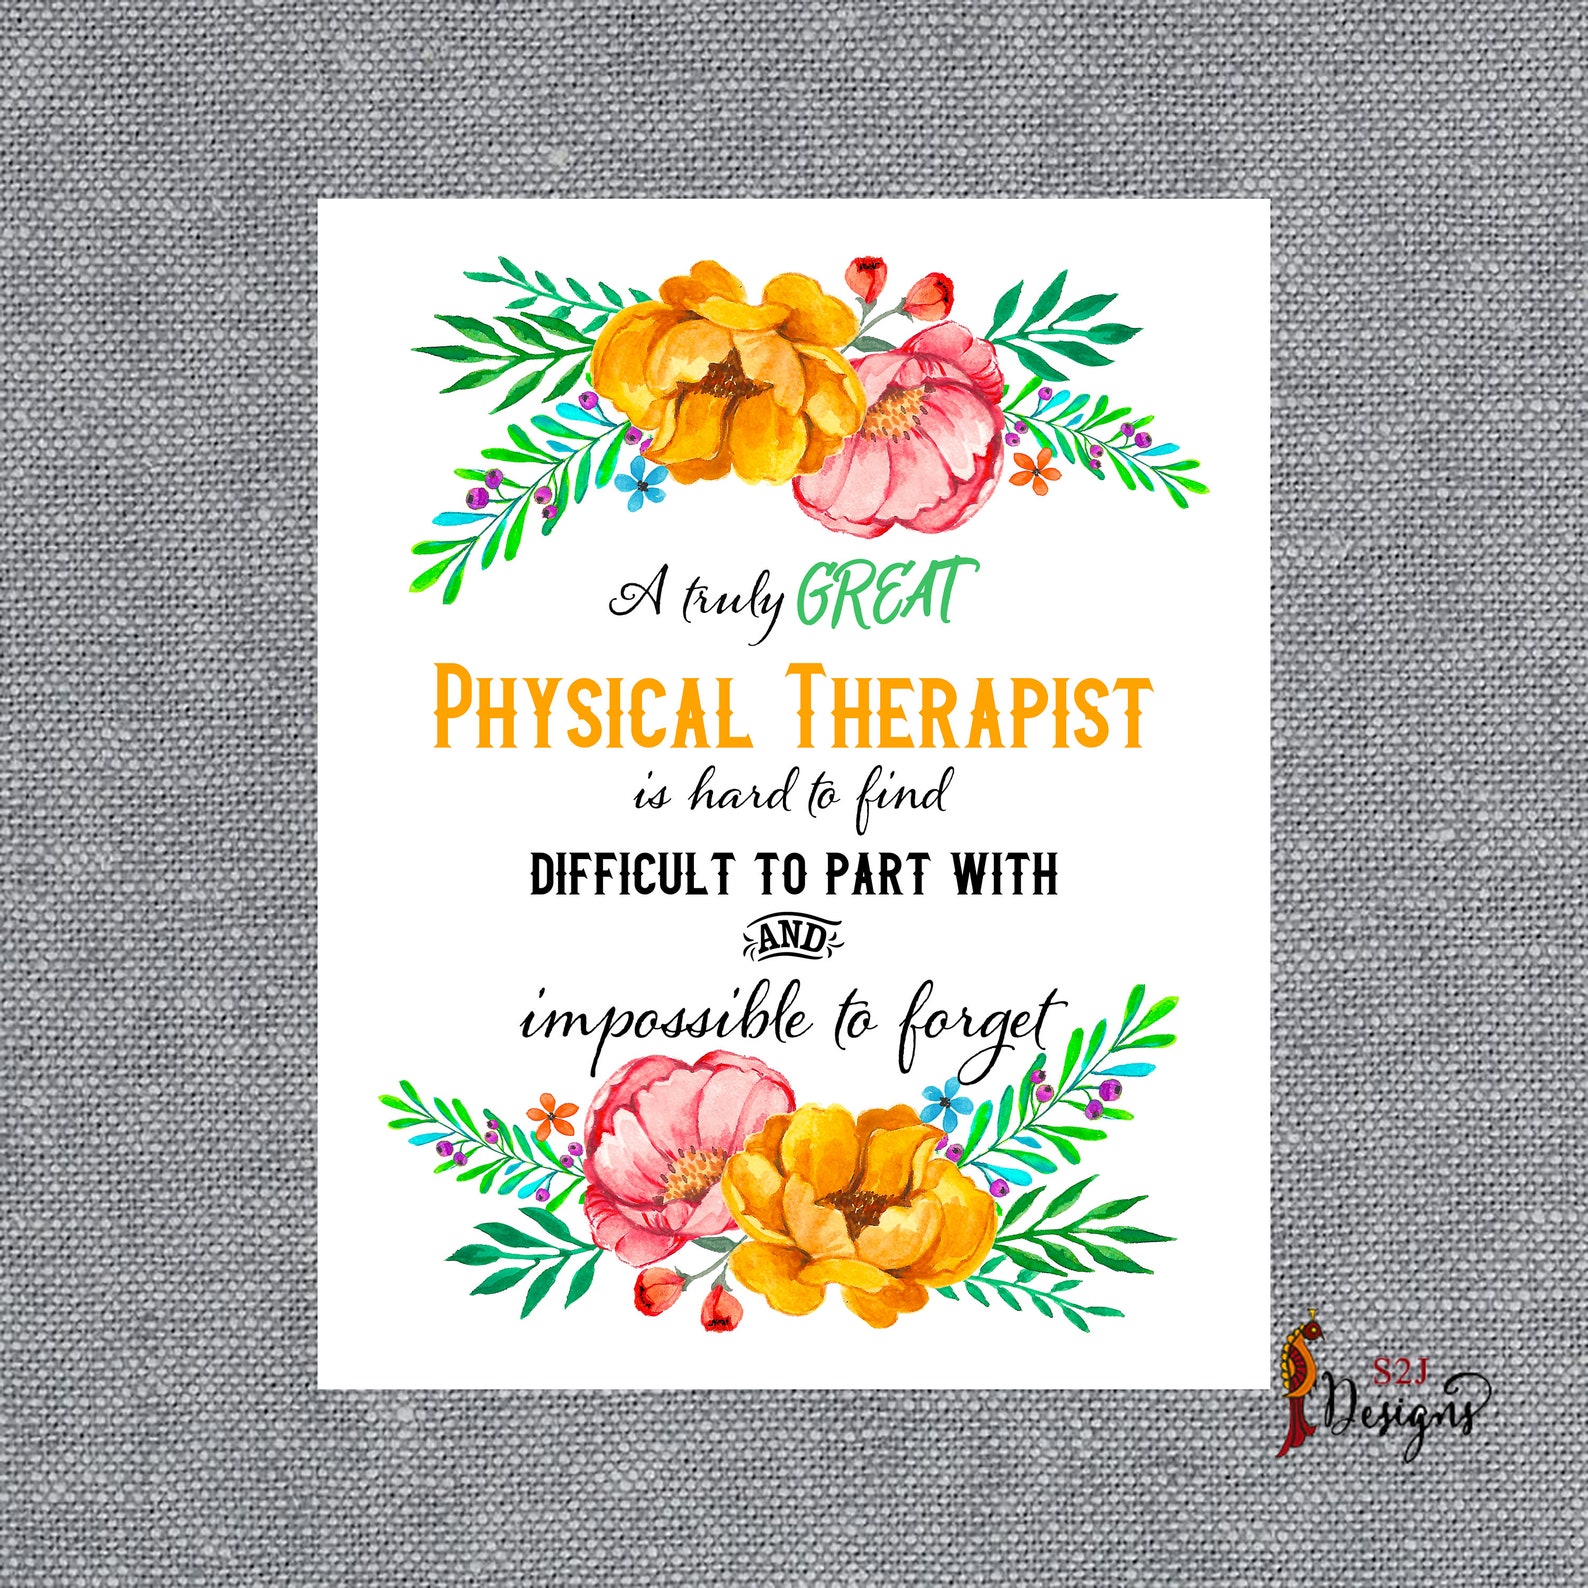 Physical Therapist Appreciation Gifts Therapy Wall Art Etsy